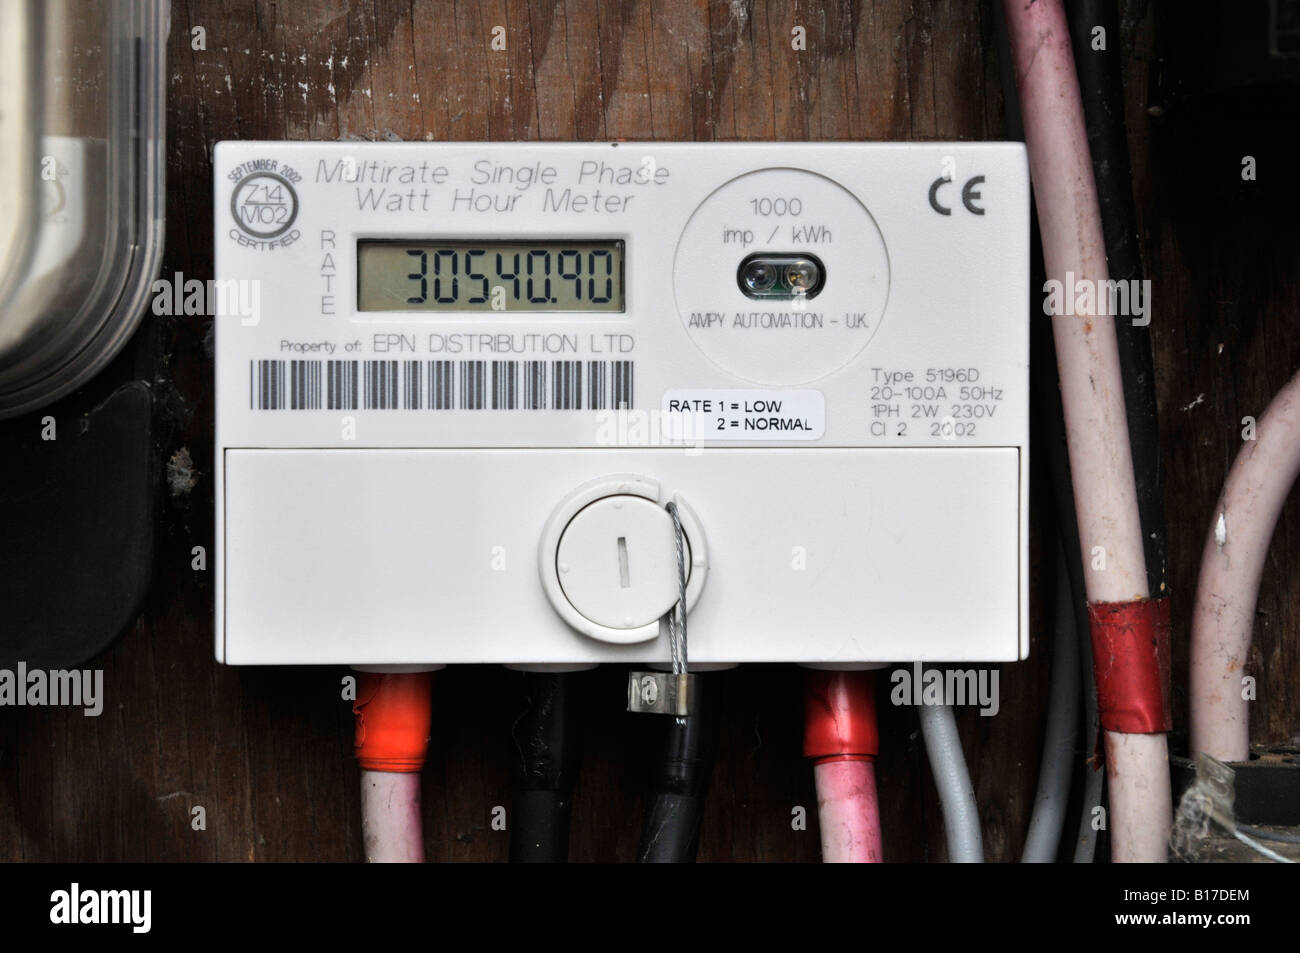 Close up sealed domestic home multirate single phase electricity meter measuring dual rate economy 7 & normal energy consumption readings England UK Stock Photo